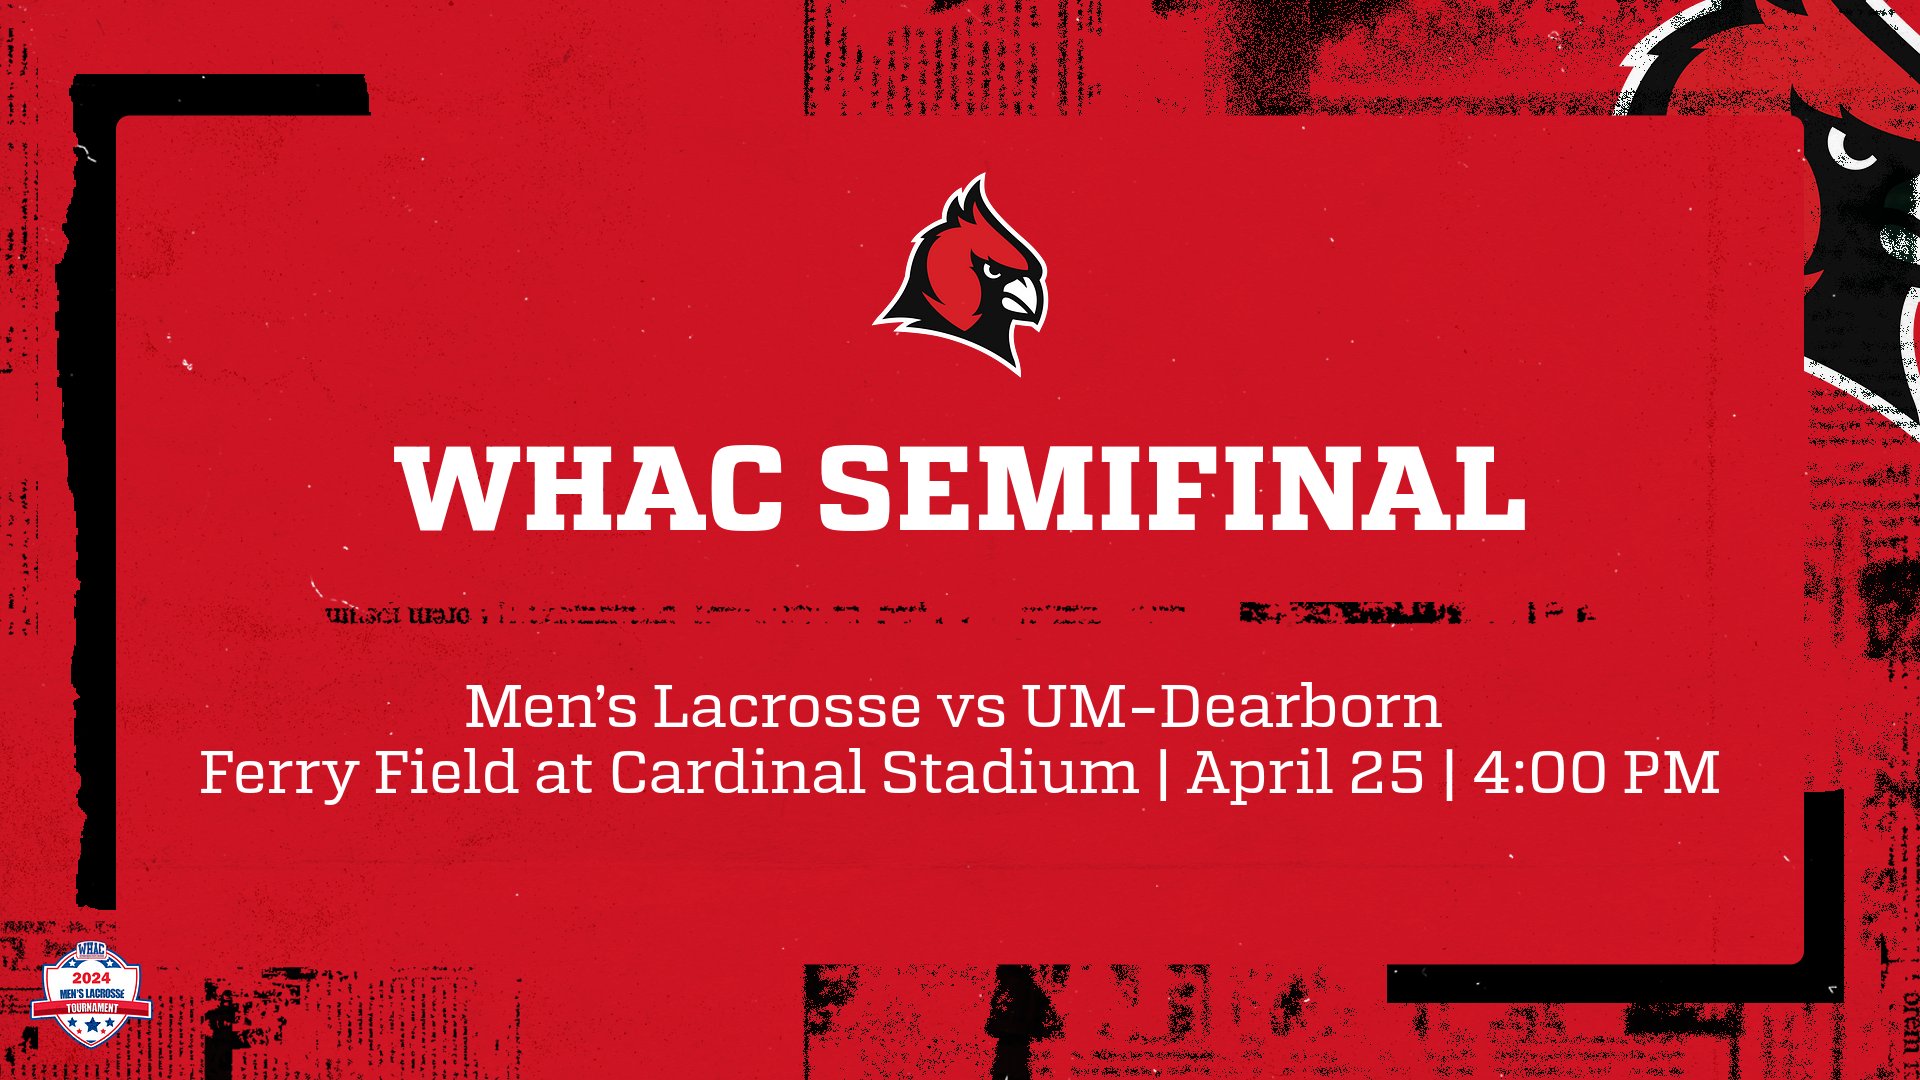 WHAC SEMIFINAL PREVIEW: Men's Lacrosse set for faceoff against UM-Dearborn in Semifinal